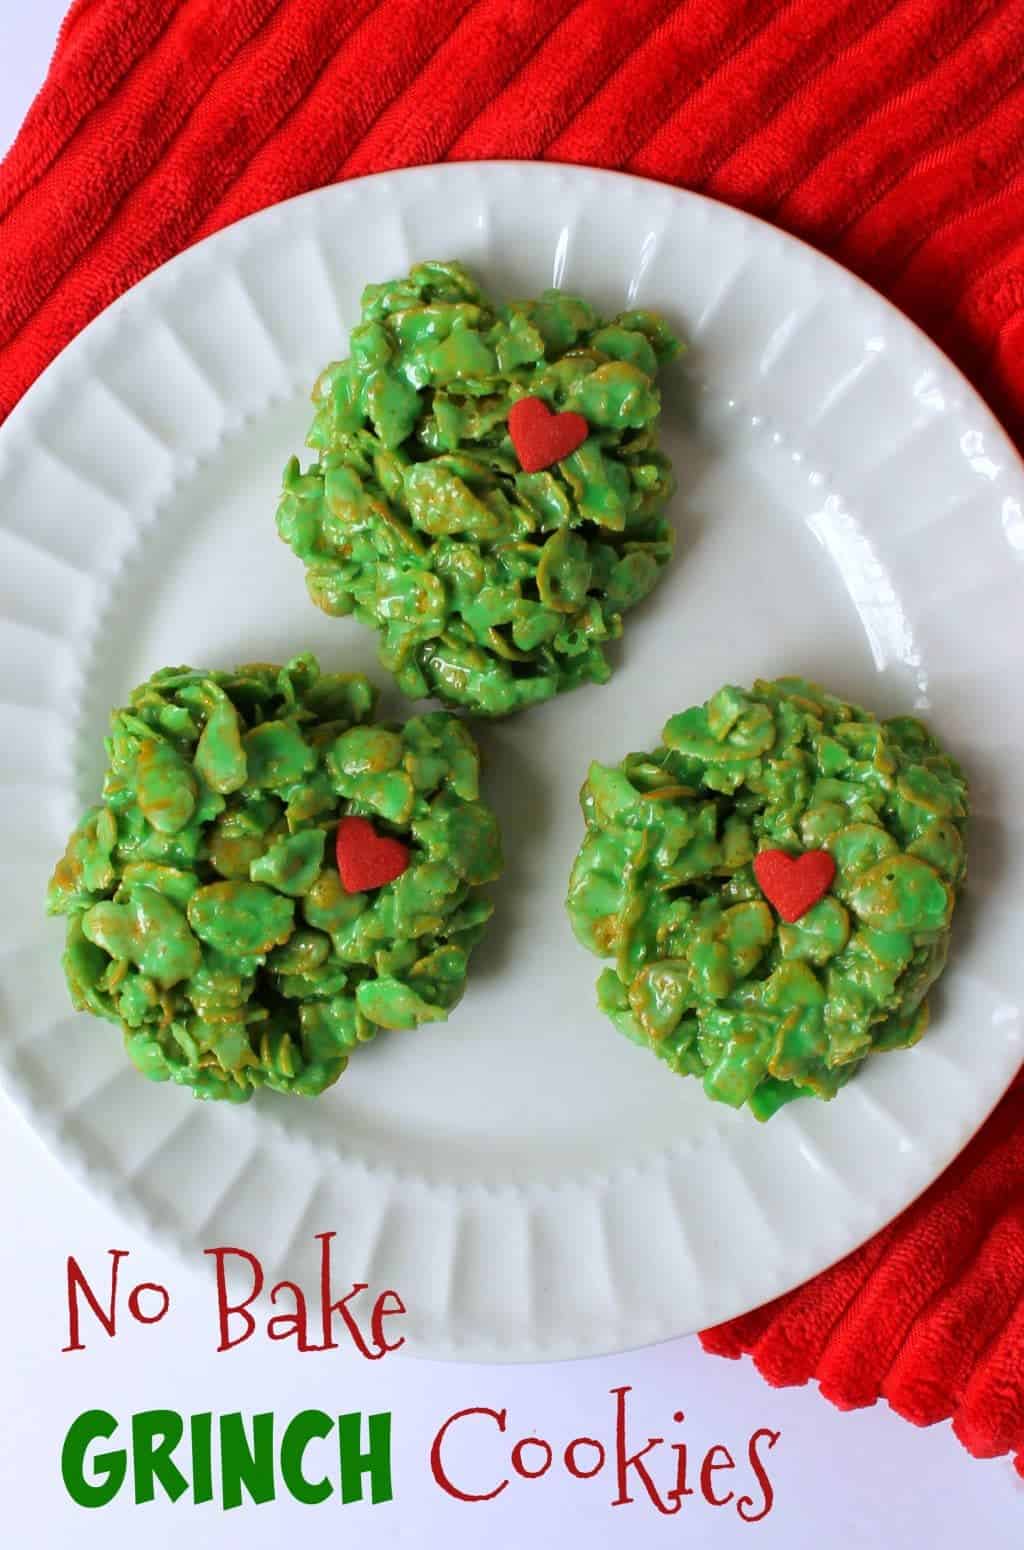 Quick and easy to make, these No Bake Grinch Cookies will be a huge hit at your Christmas gatherings!